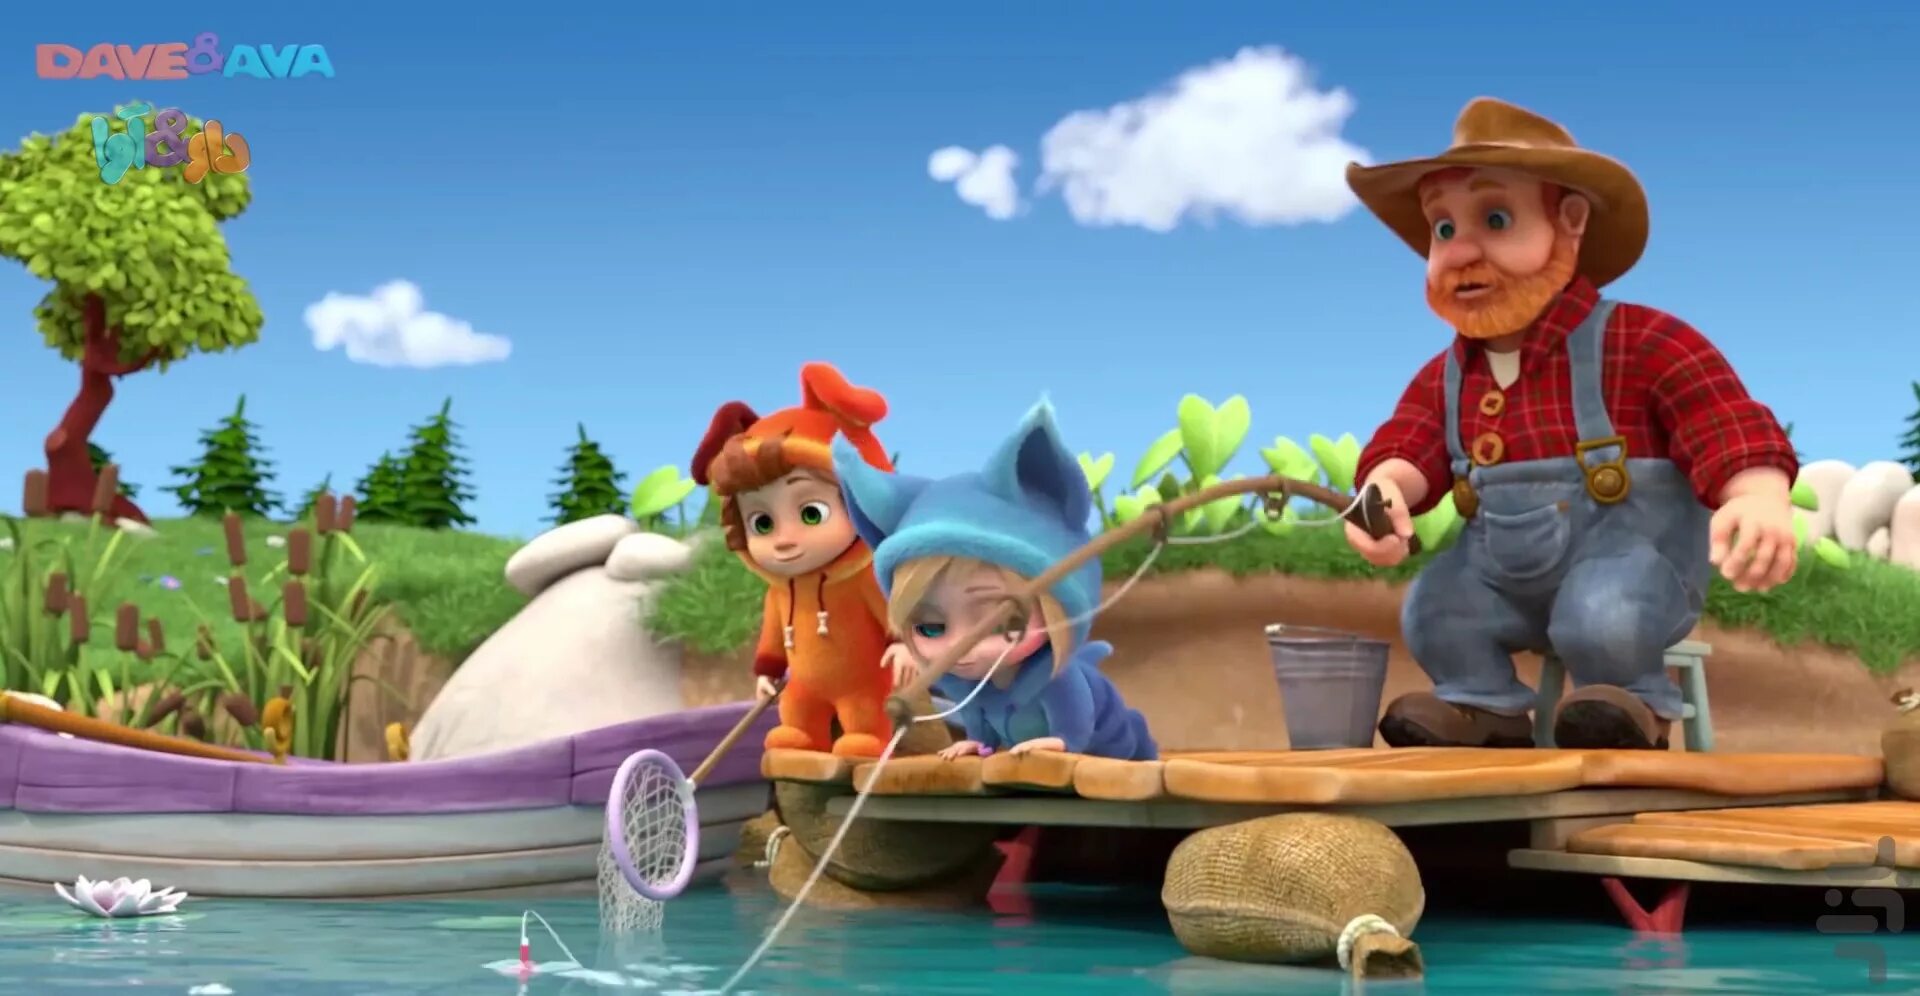 Dave and Ava персонажи. Dave and Ava Fish. Bob the Builder big Fish little Fish Bridge TV Baby time.